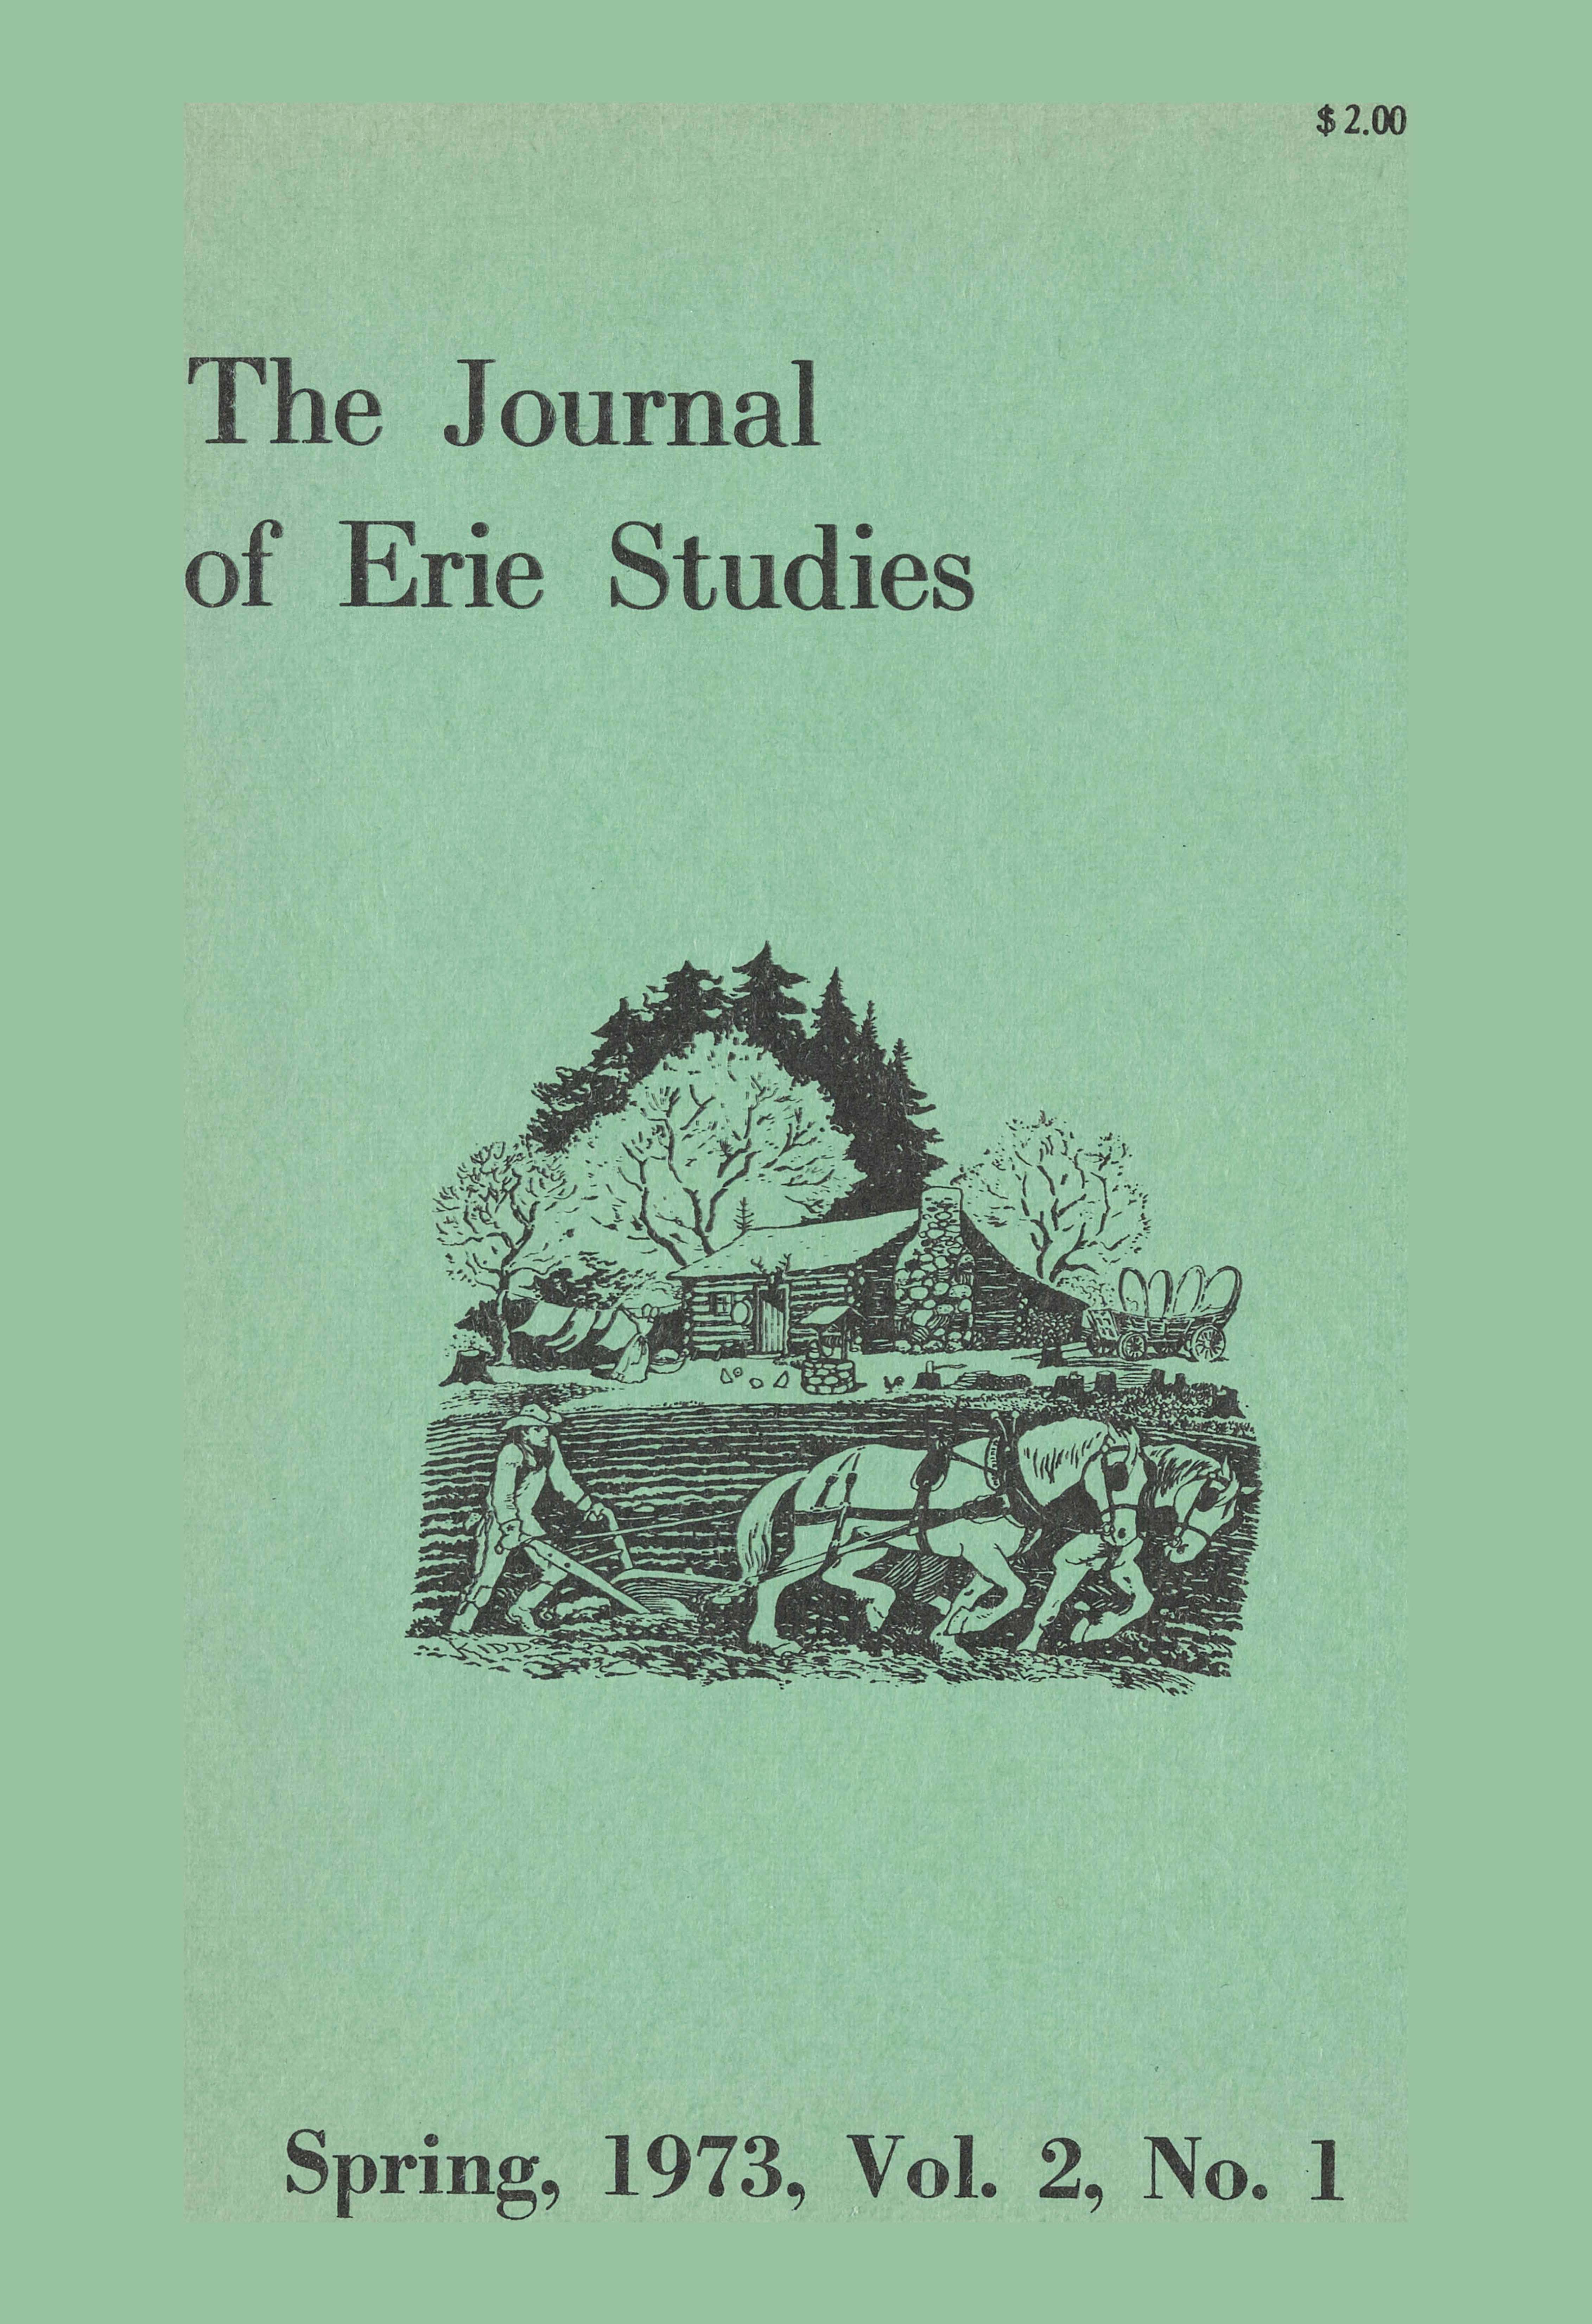 Cover of the spring 1973 issue of The Journal of Erie Studies.